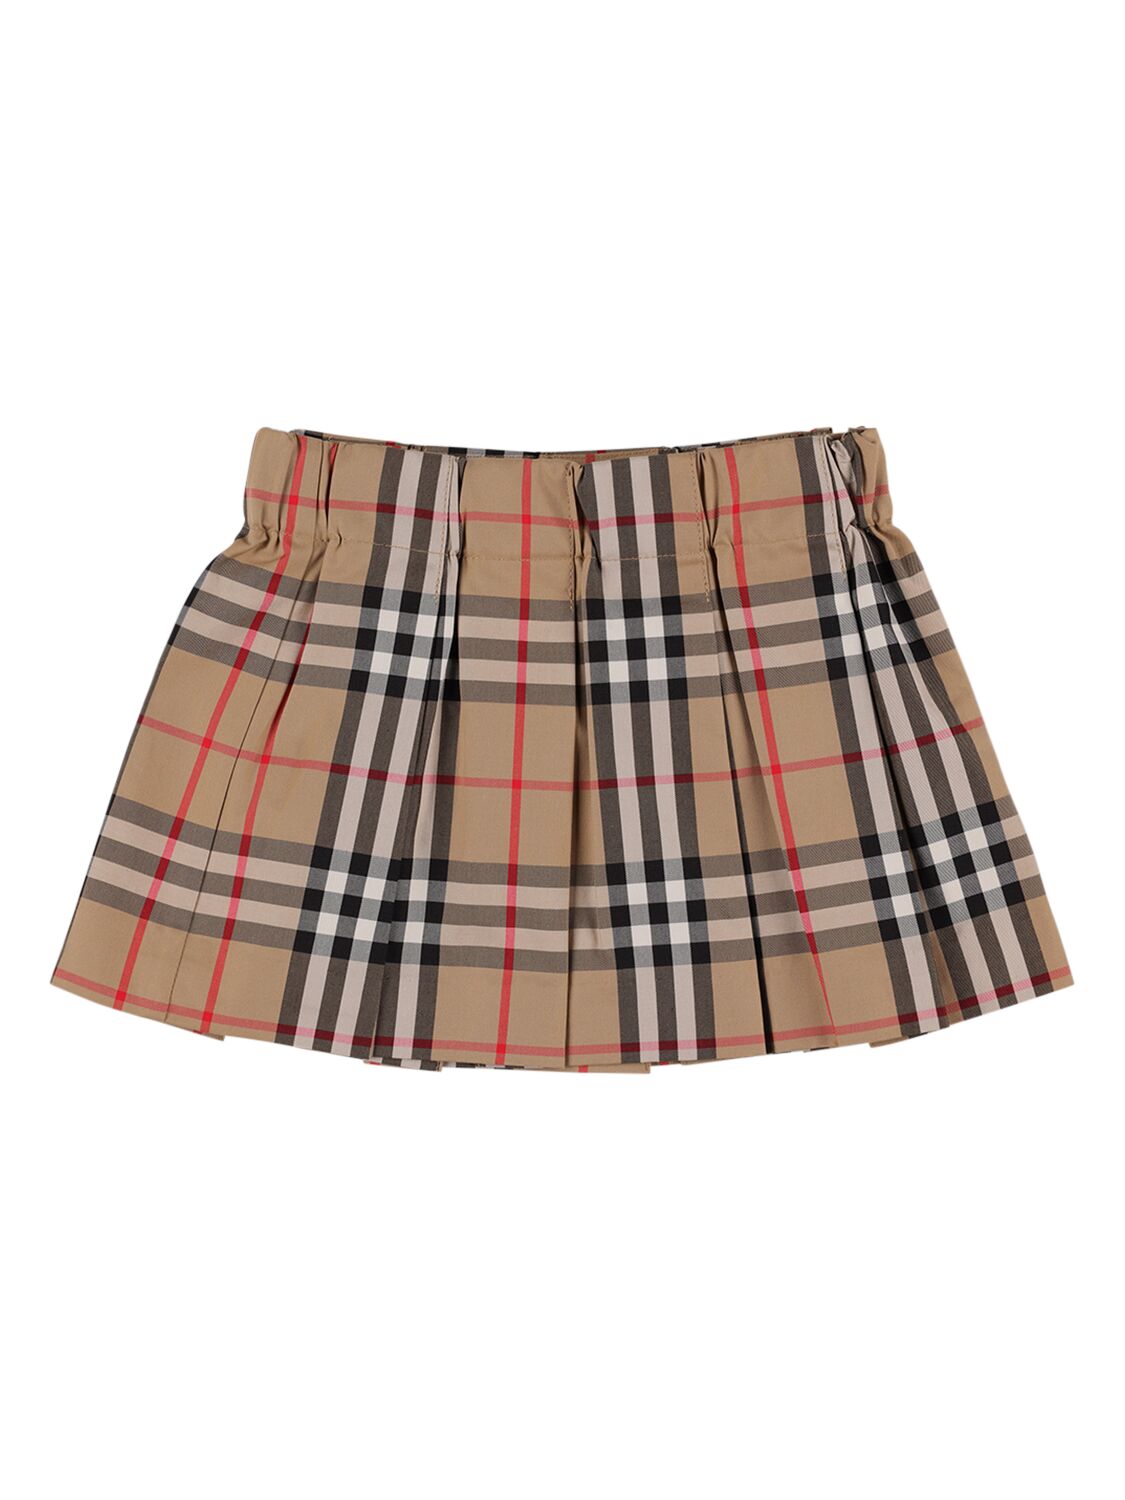 Image of Check Print Pleated Cotton Skirt